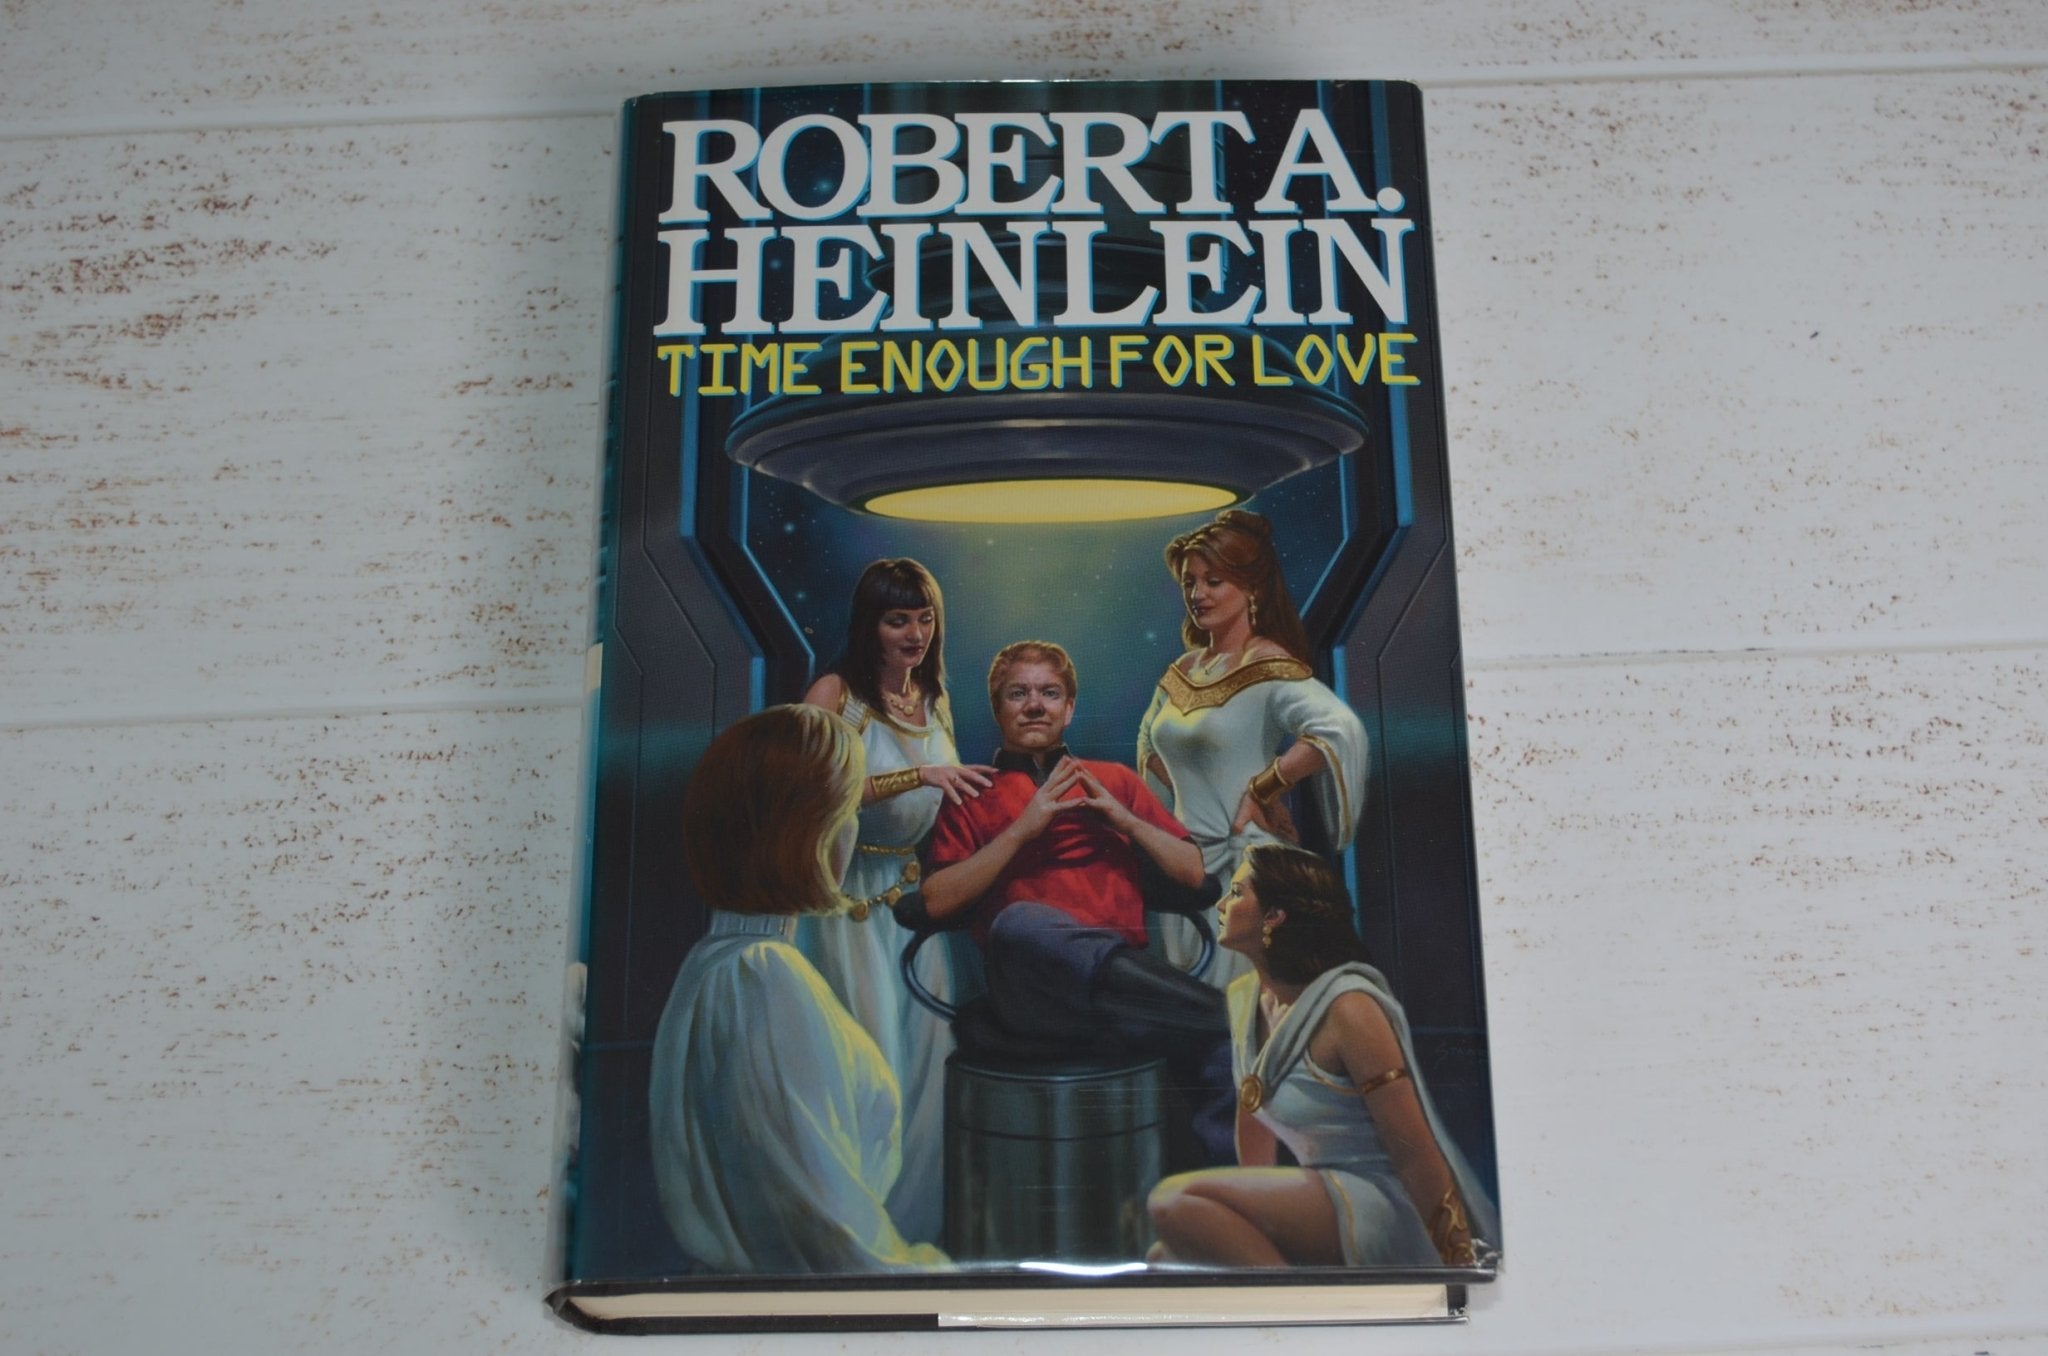 Book Club Edition - Time Enough For Love by Robert Heinlein 1973 - Brookfield Books